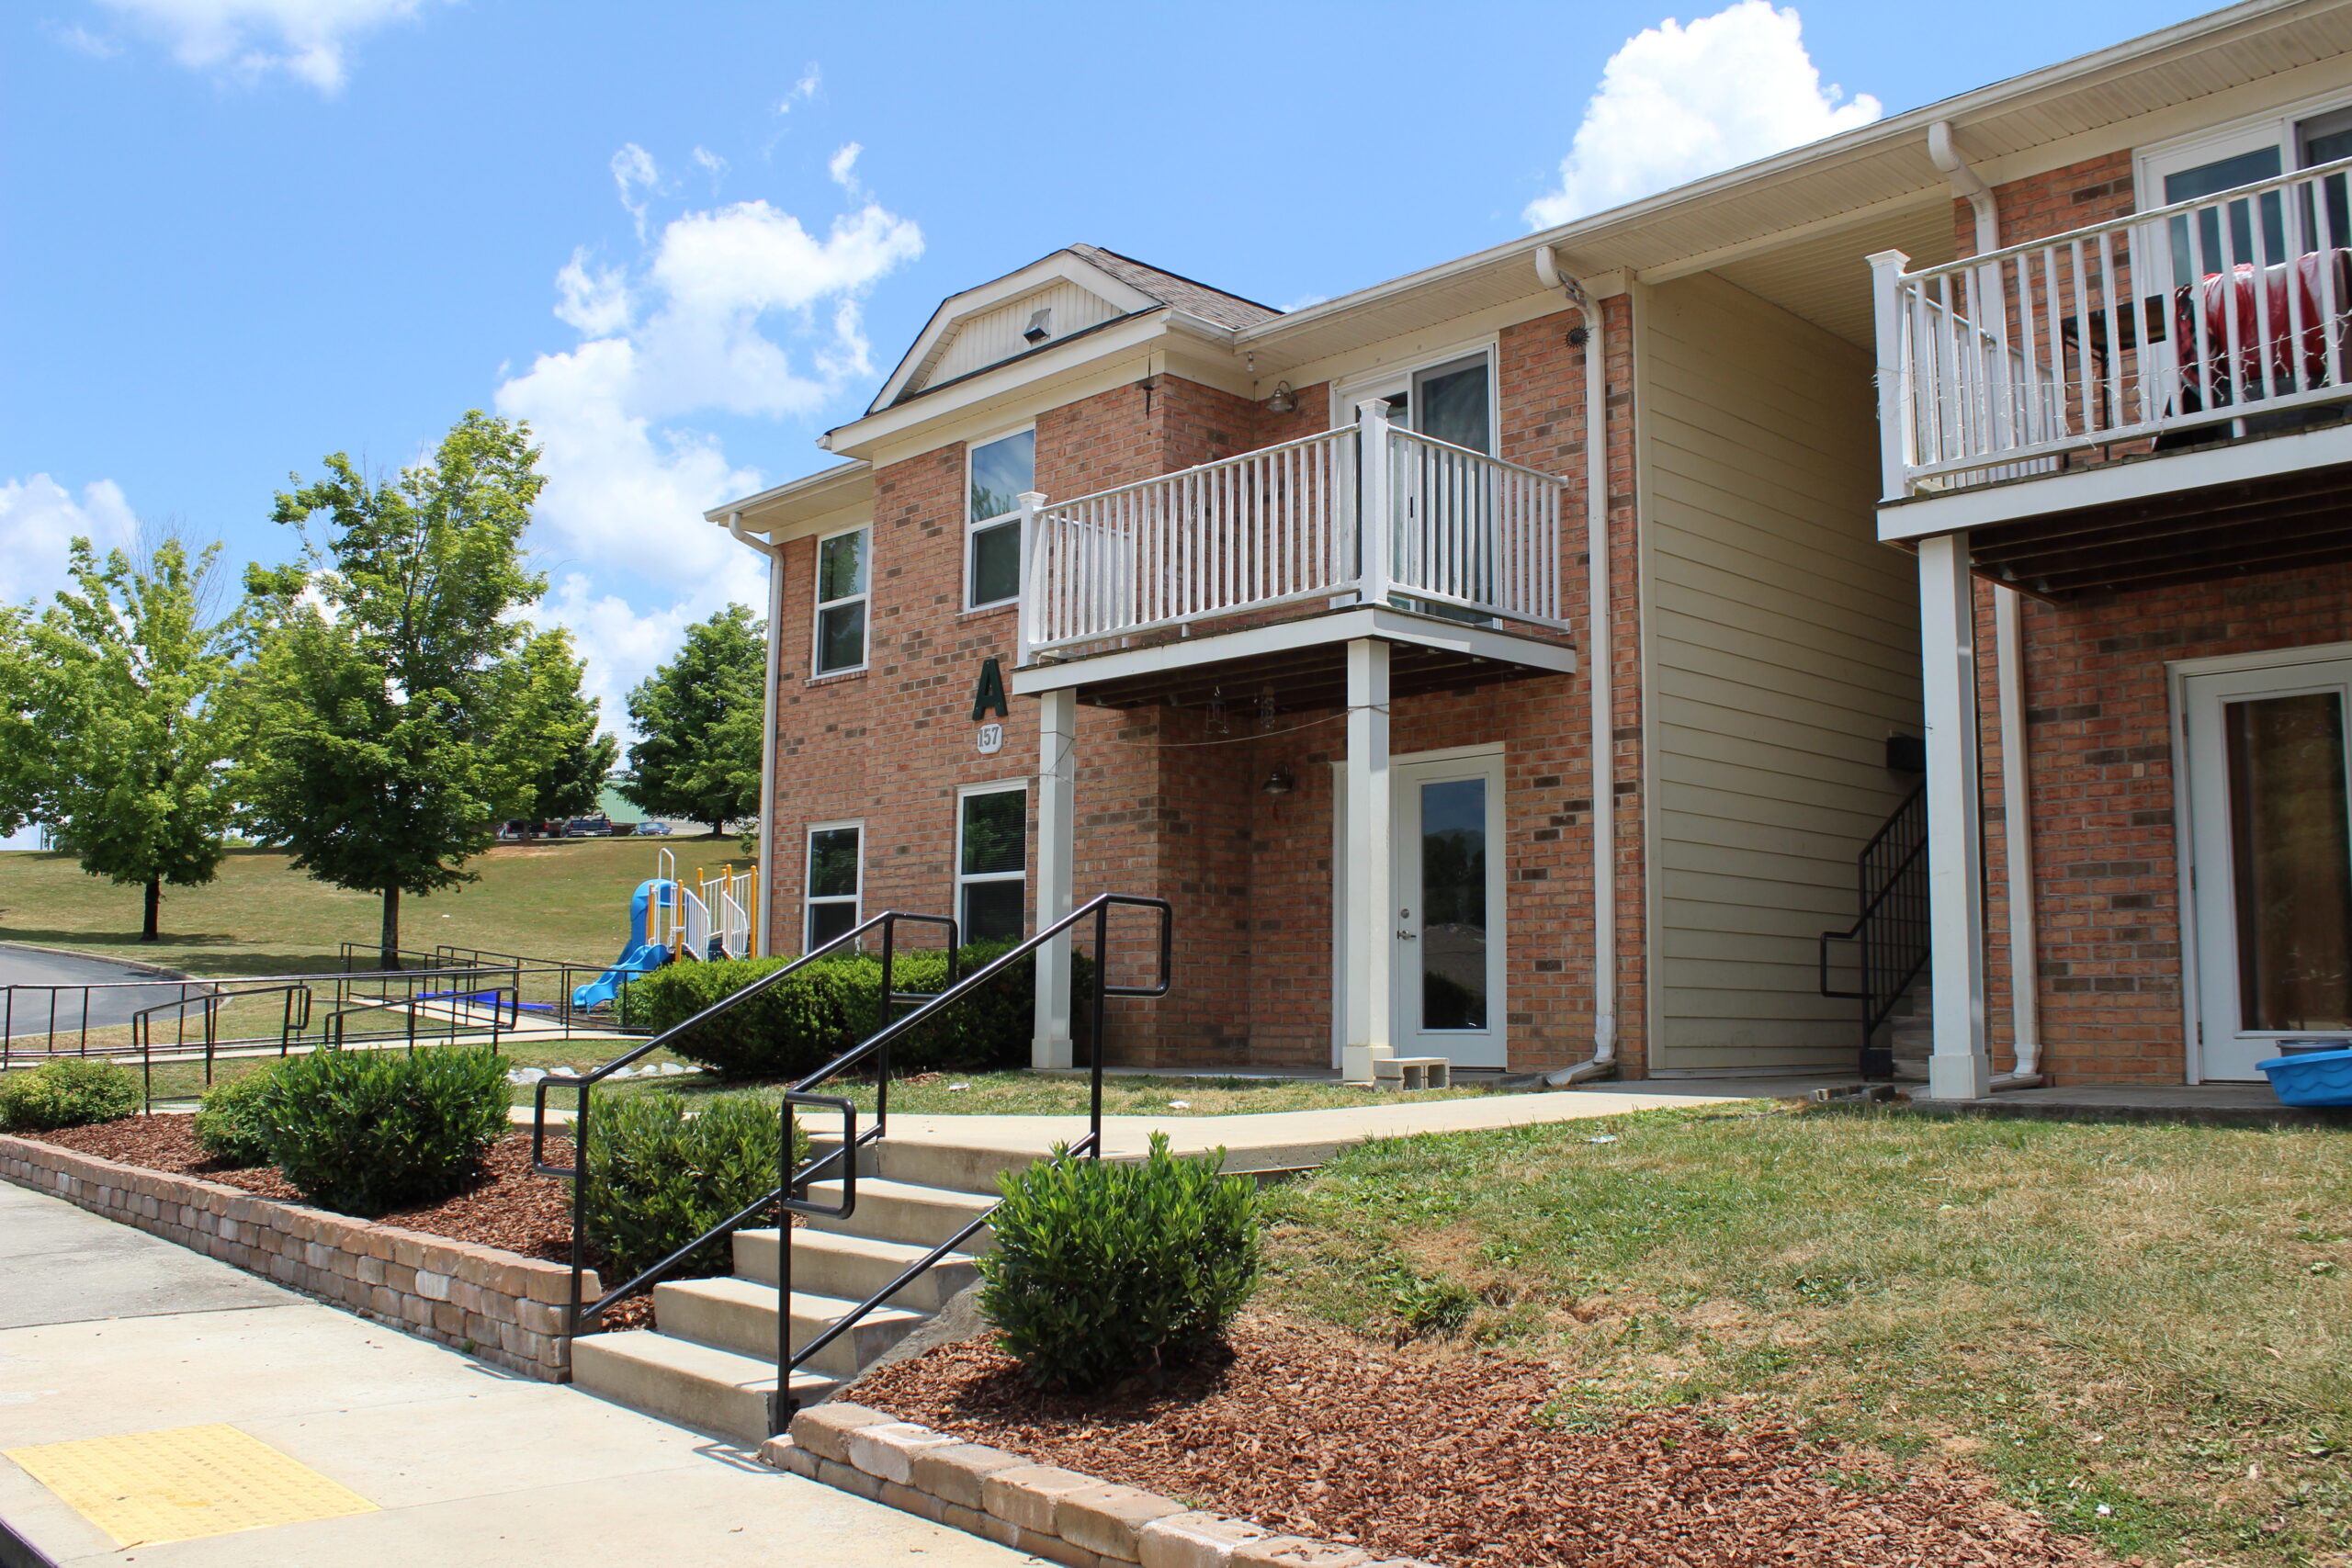 POWELL VALLEY VILLAGE APARTMENTS